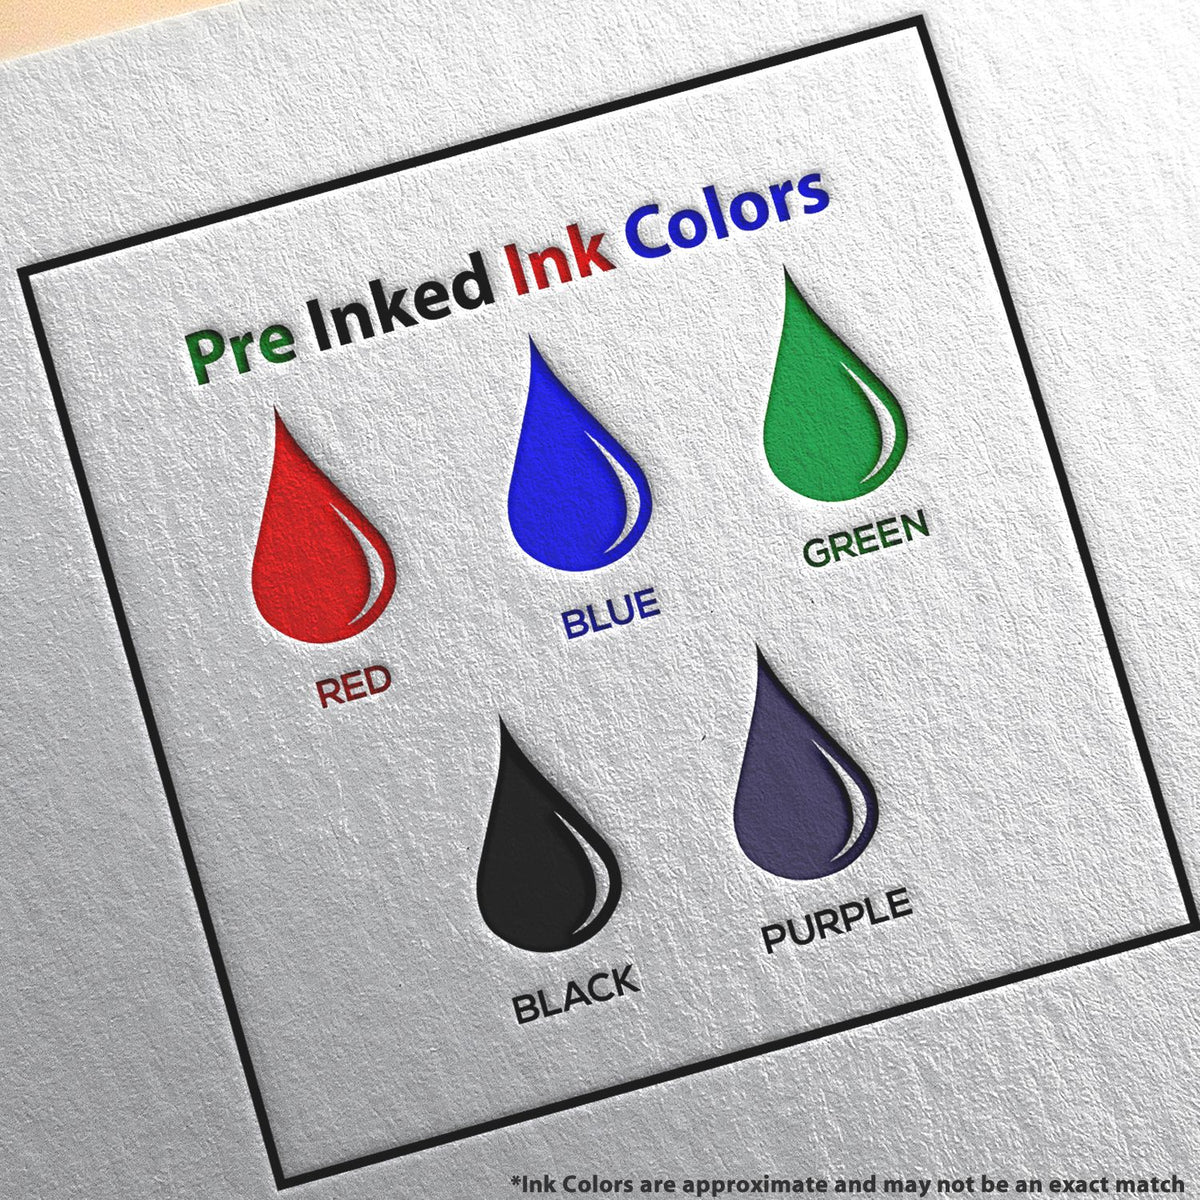 A picture showing the different ink colors or hues available for the Slim Pre-Inked Nebraska Landscape Architect Seal Stamp product.